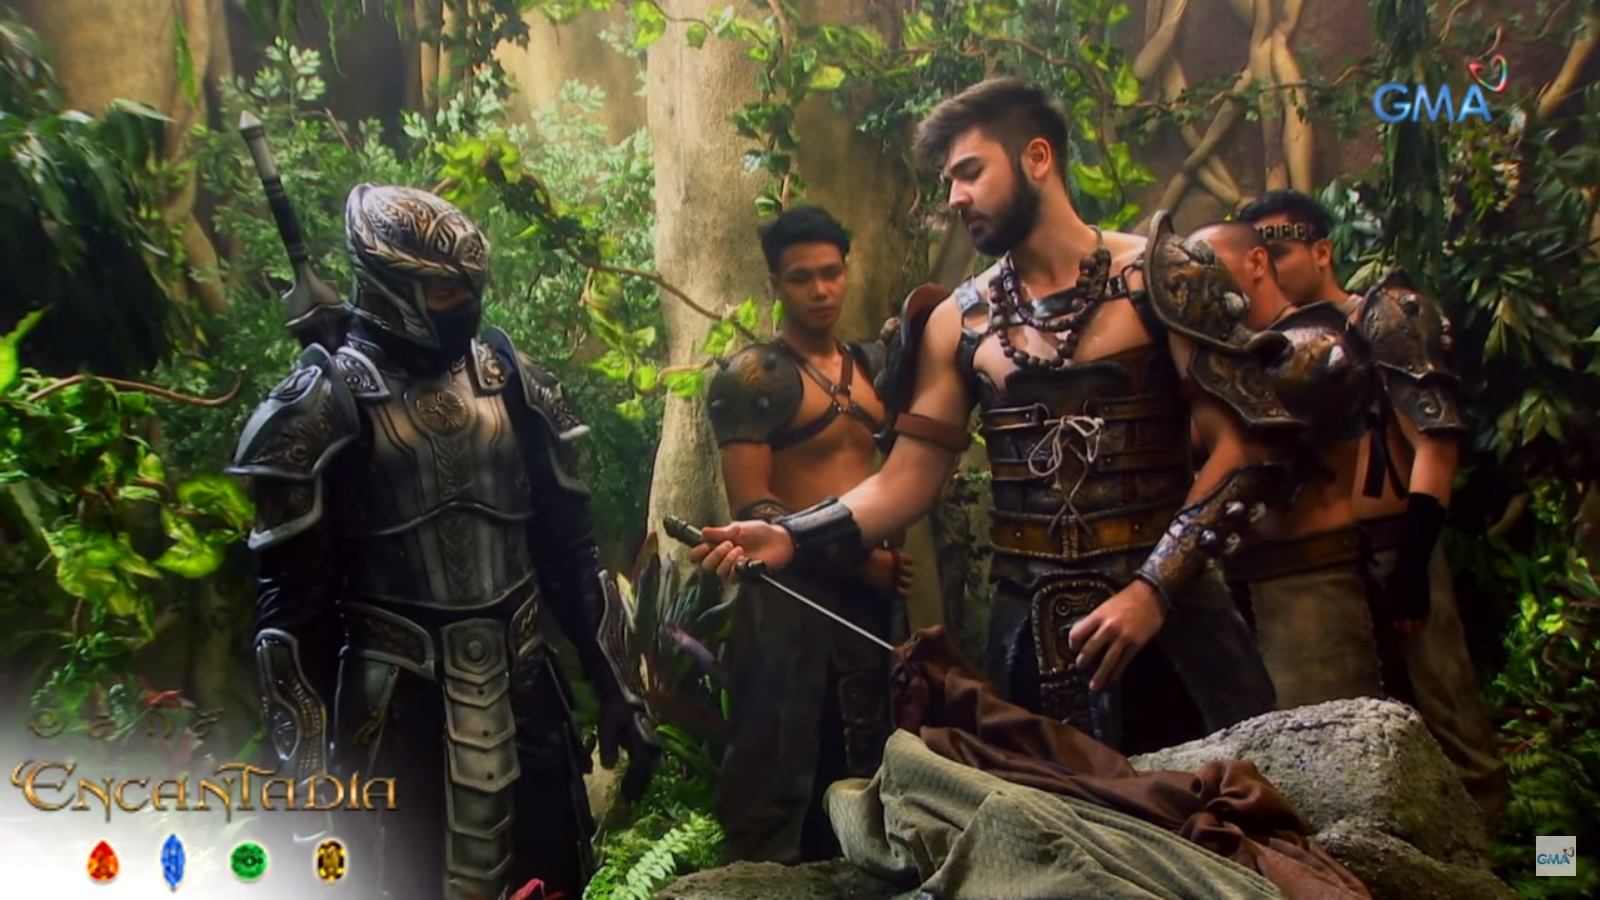 Andre Paras In Encantadia - Pc Game , HD Wallpaper & Backgrounds